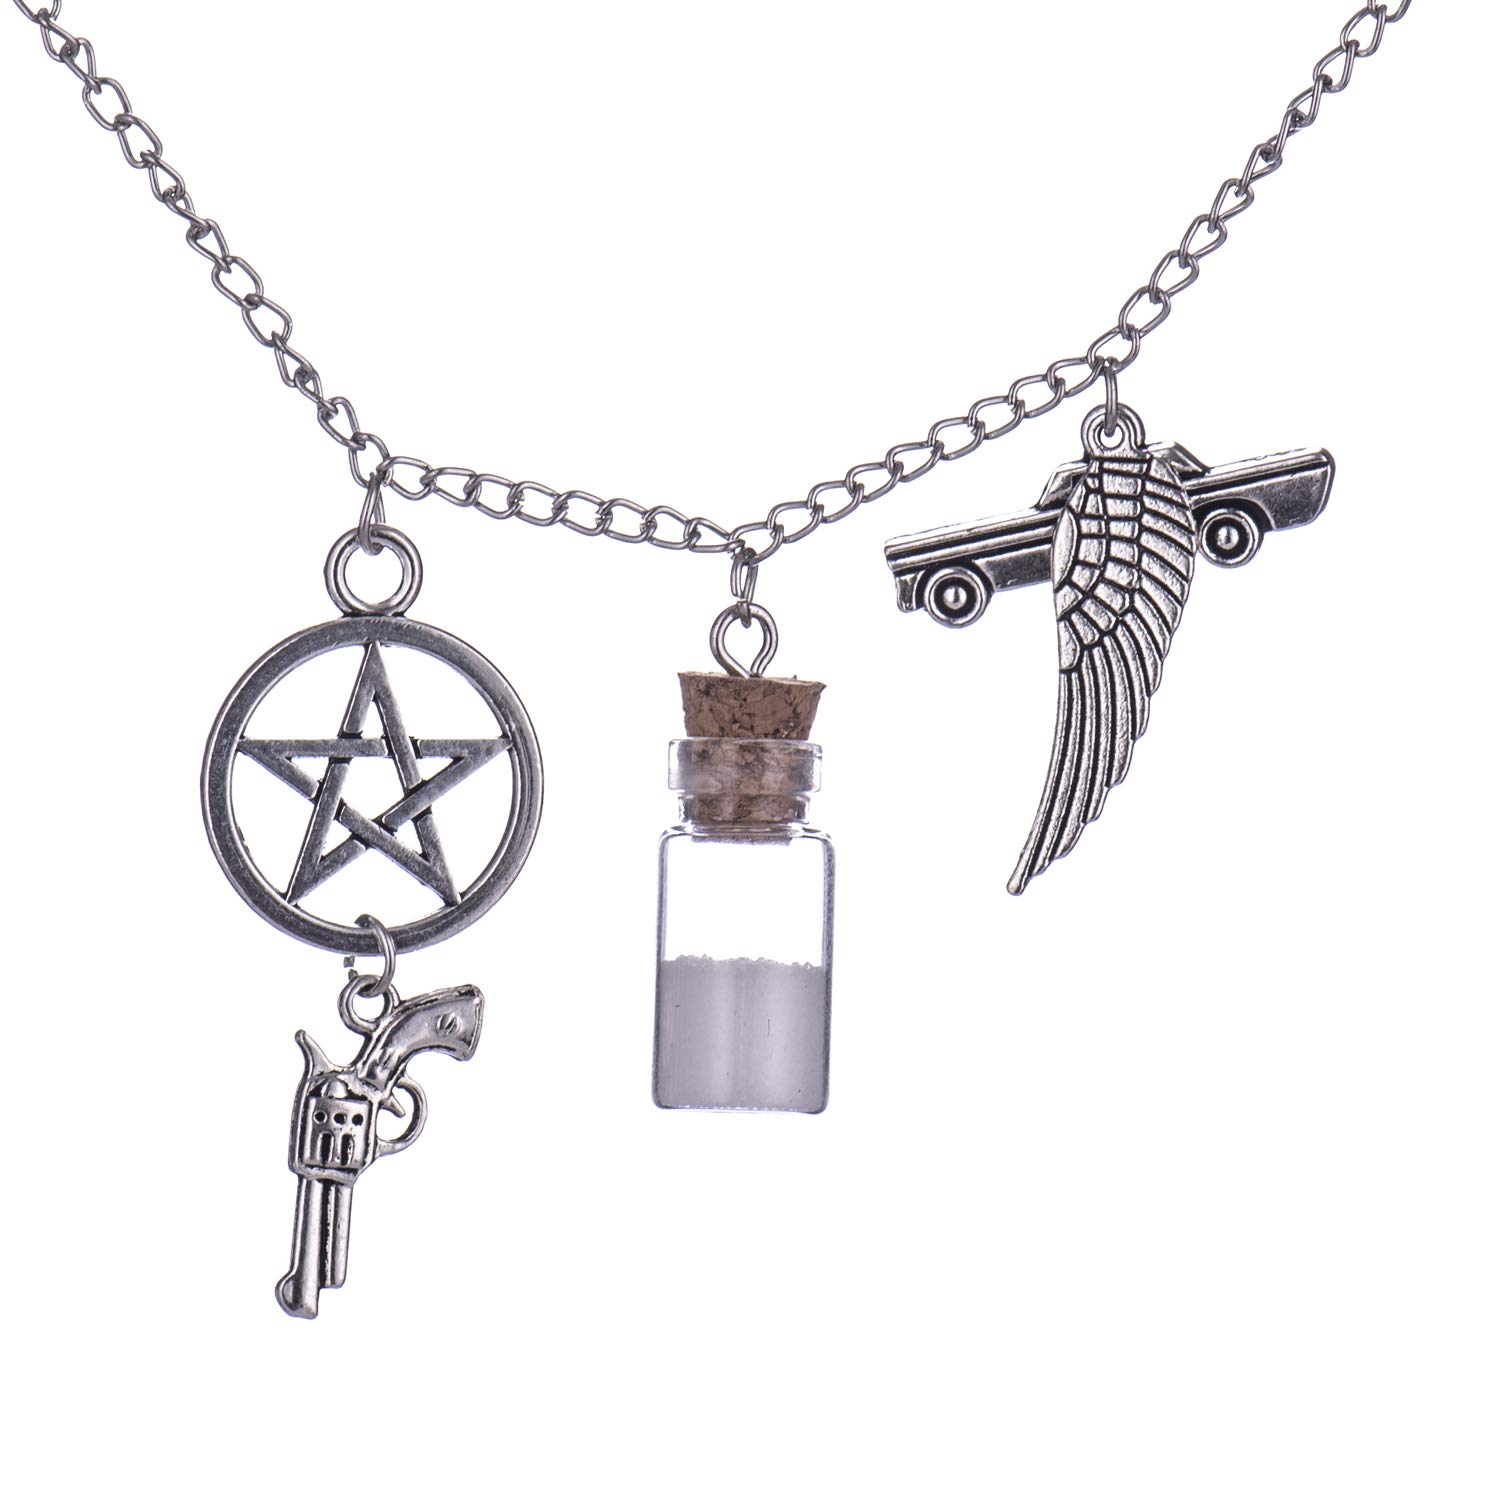 Supernatural Inspired Salt Bottle Protection Charm Necklace Pendant - Stainless Steel Chain